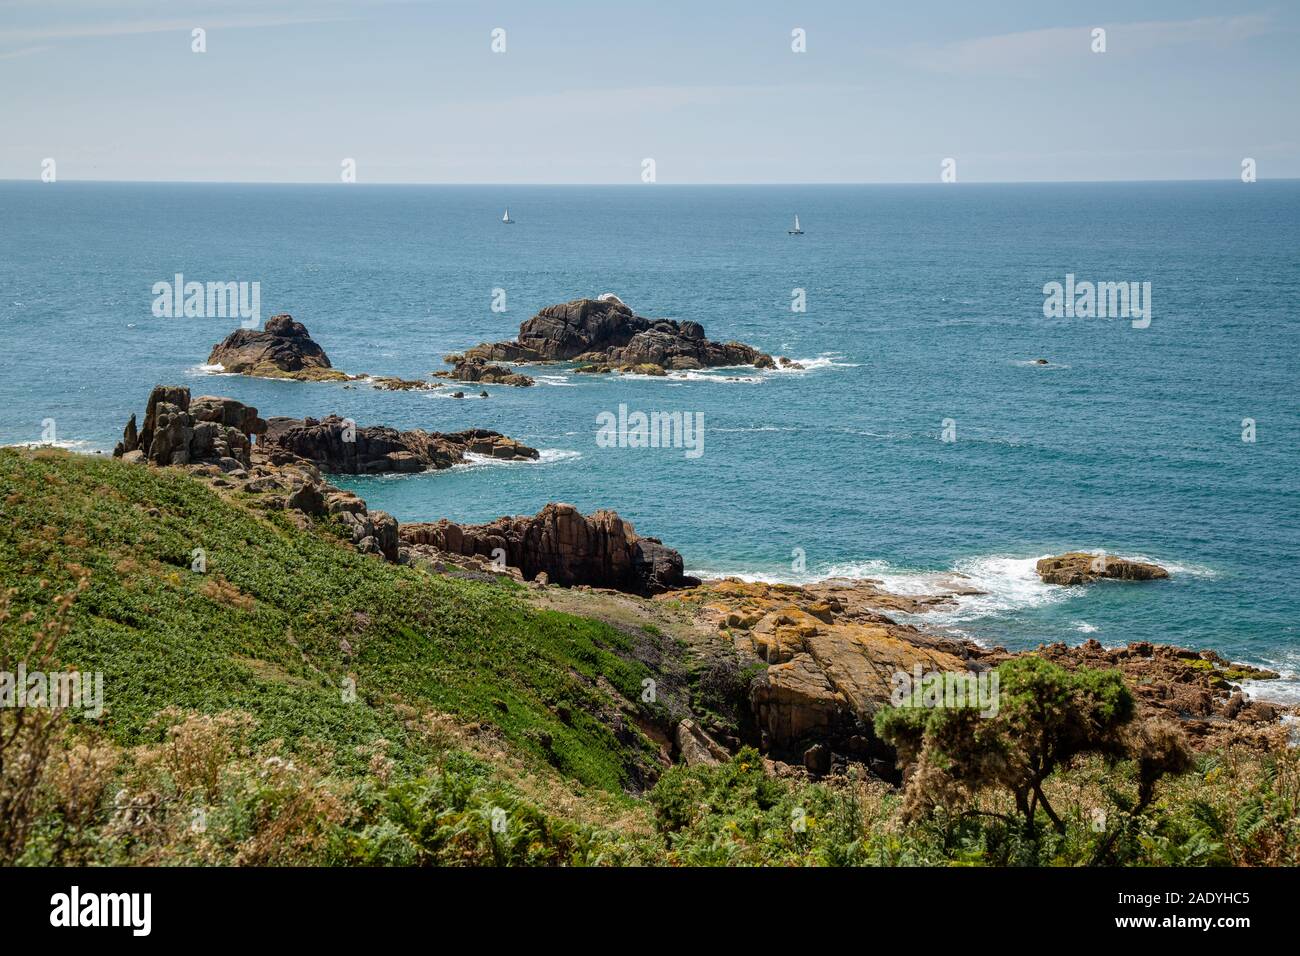 Seaview off the coast of Jersey, Channel Islands Stock Photo